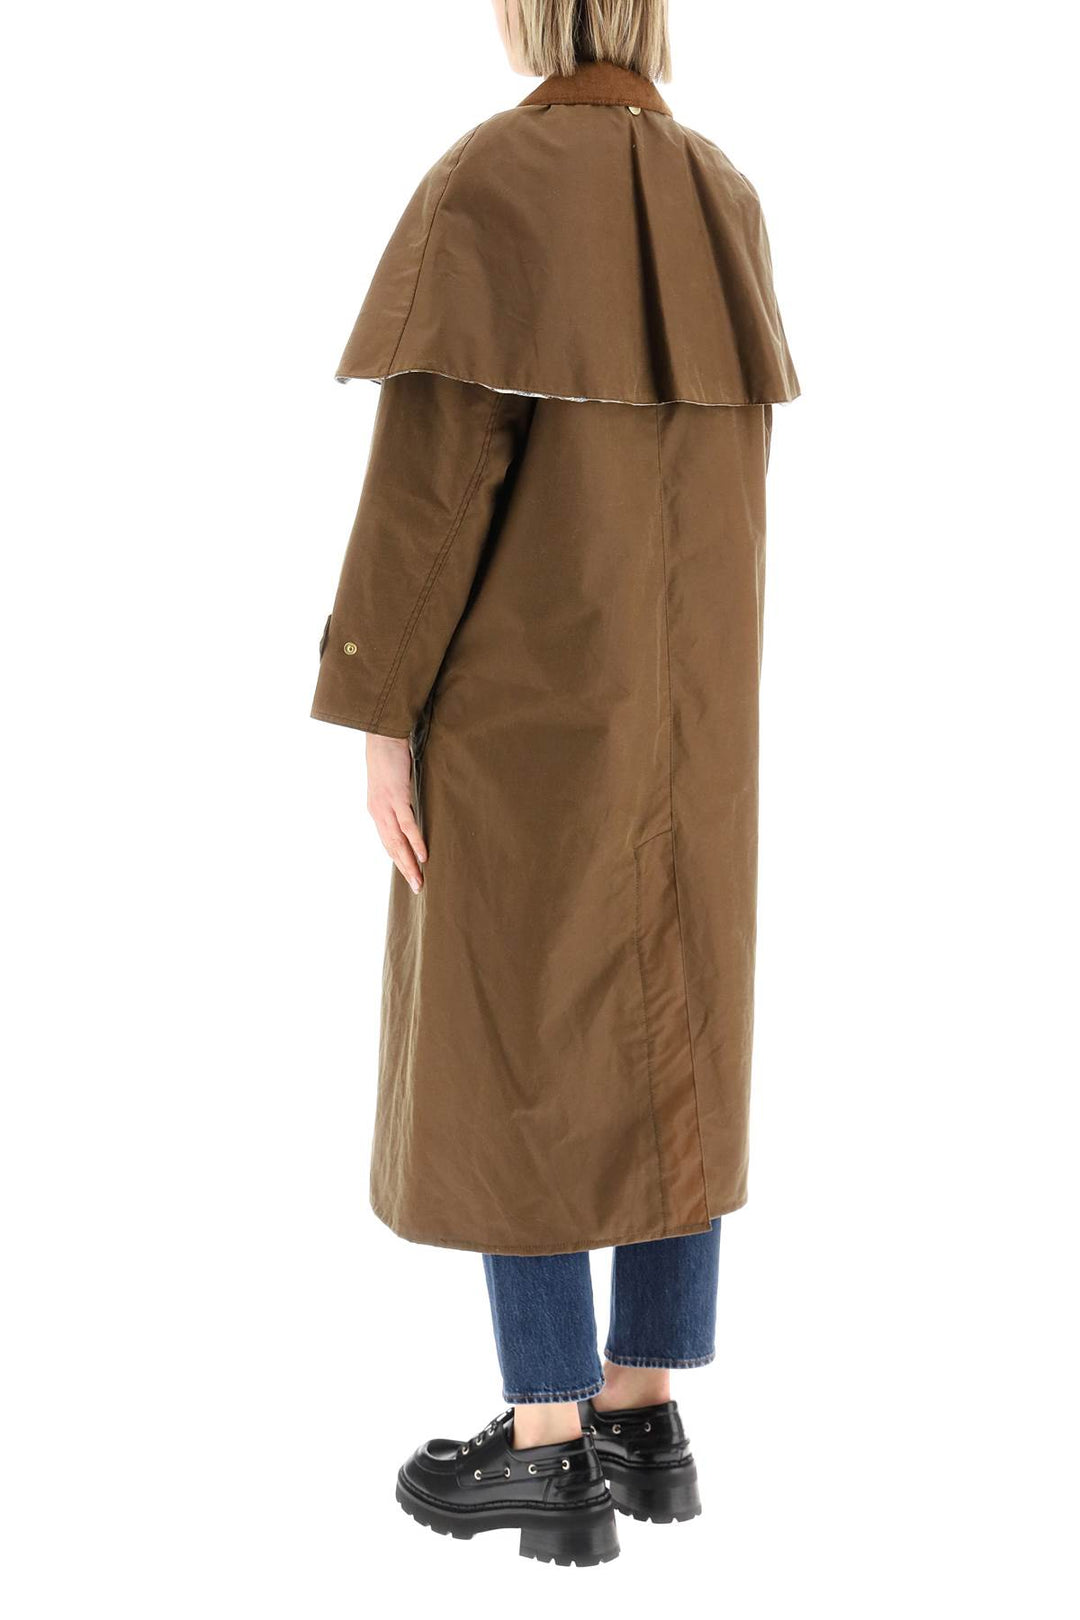 Trench In Cotone Cerato 'Elizabeth' - Barbour By Alexa Chung - Donna